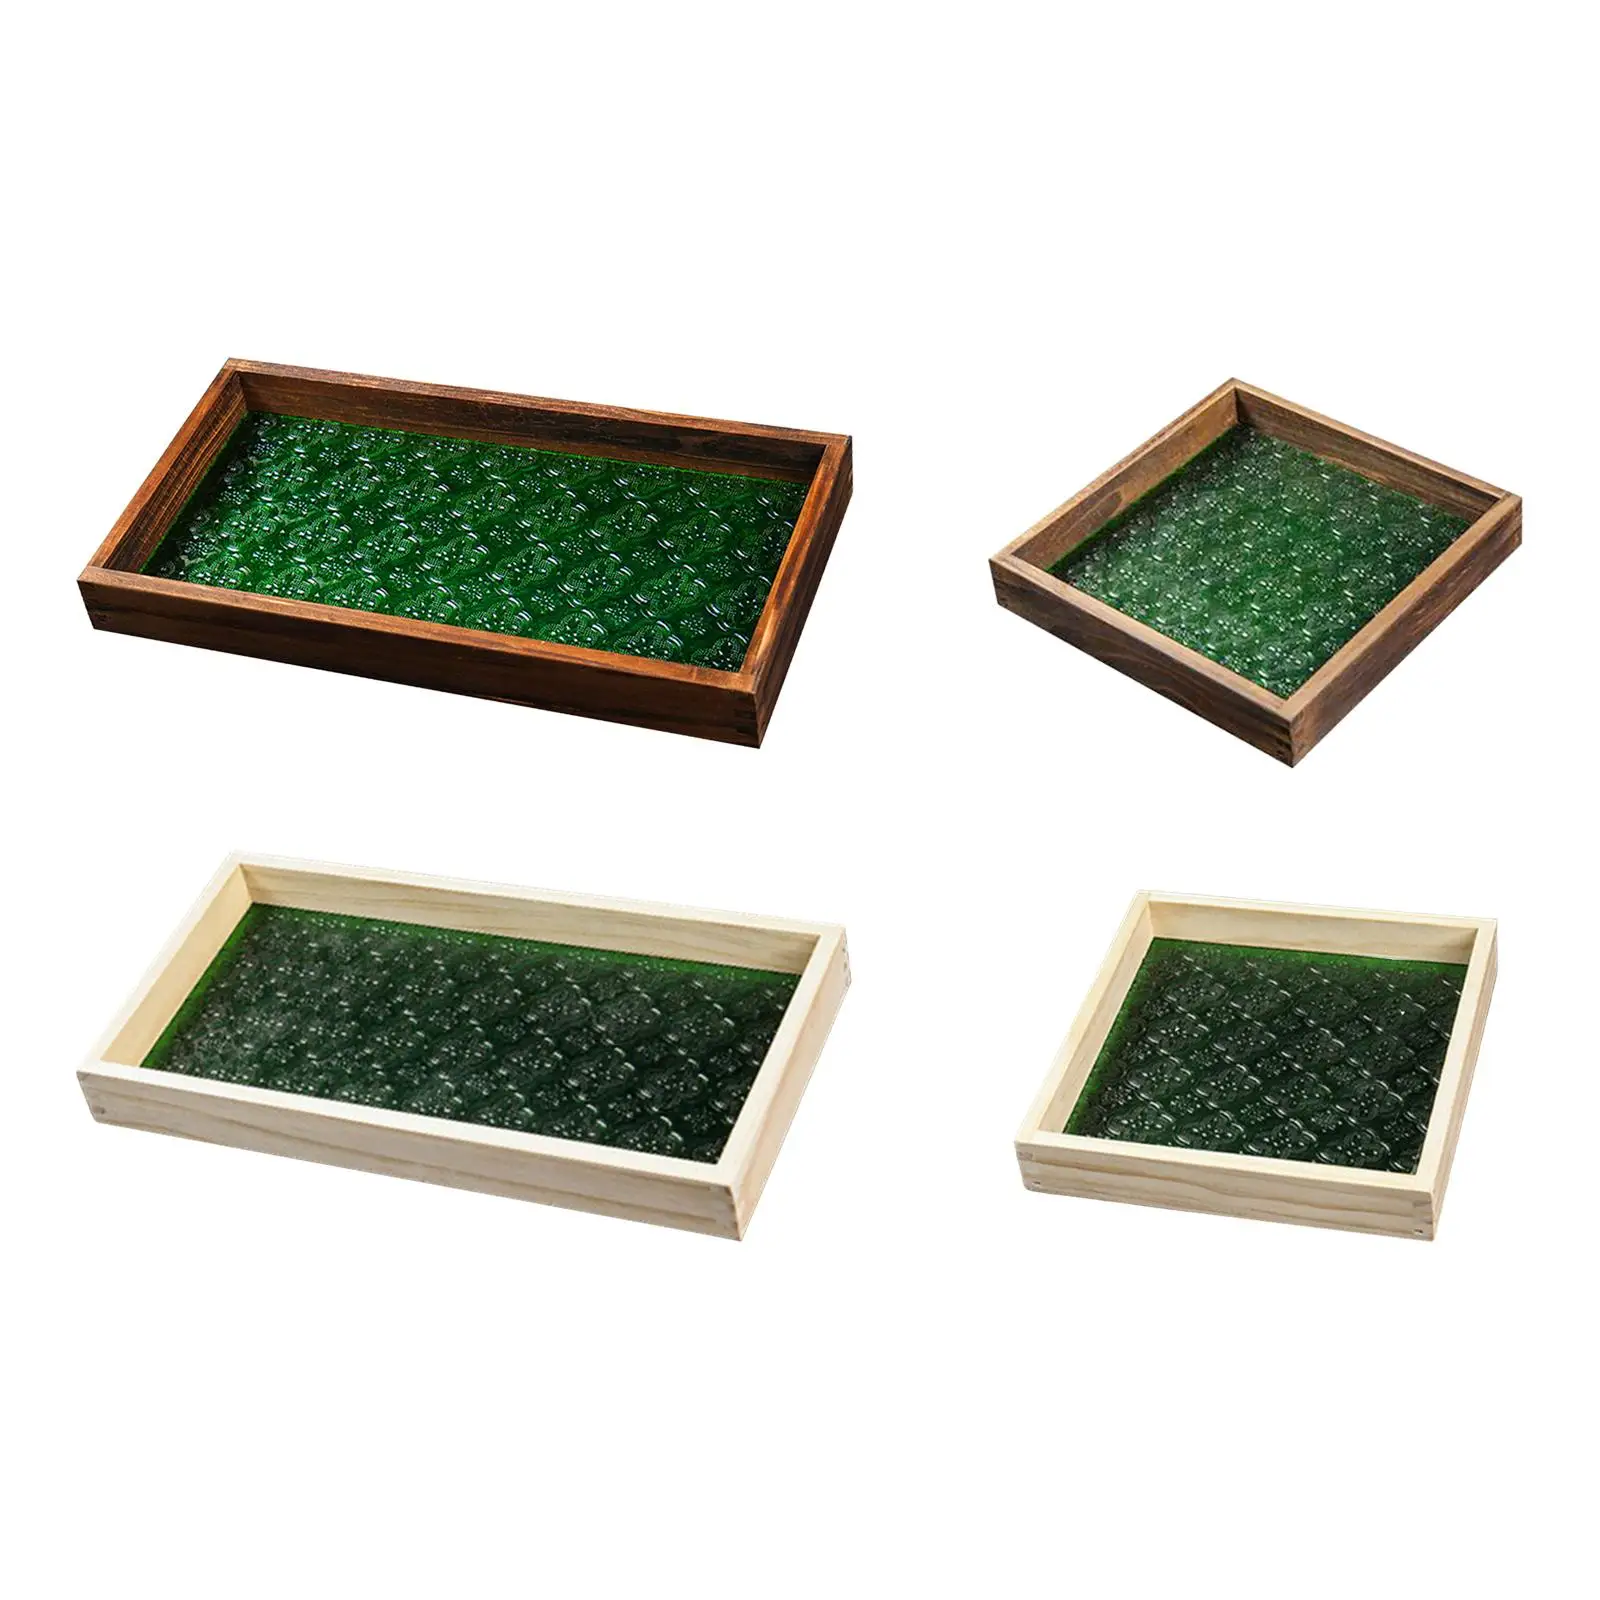 Serving Tray Chinese Style Countertop Breakfast Tray Snack Tray Coffee Tea Trays for Hotel Kitchen Home Decor Breakfast Dinners